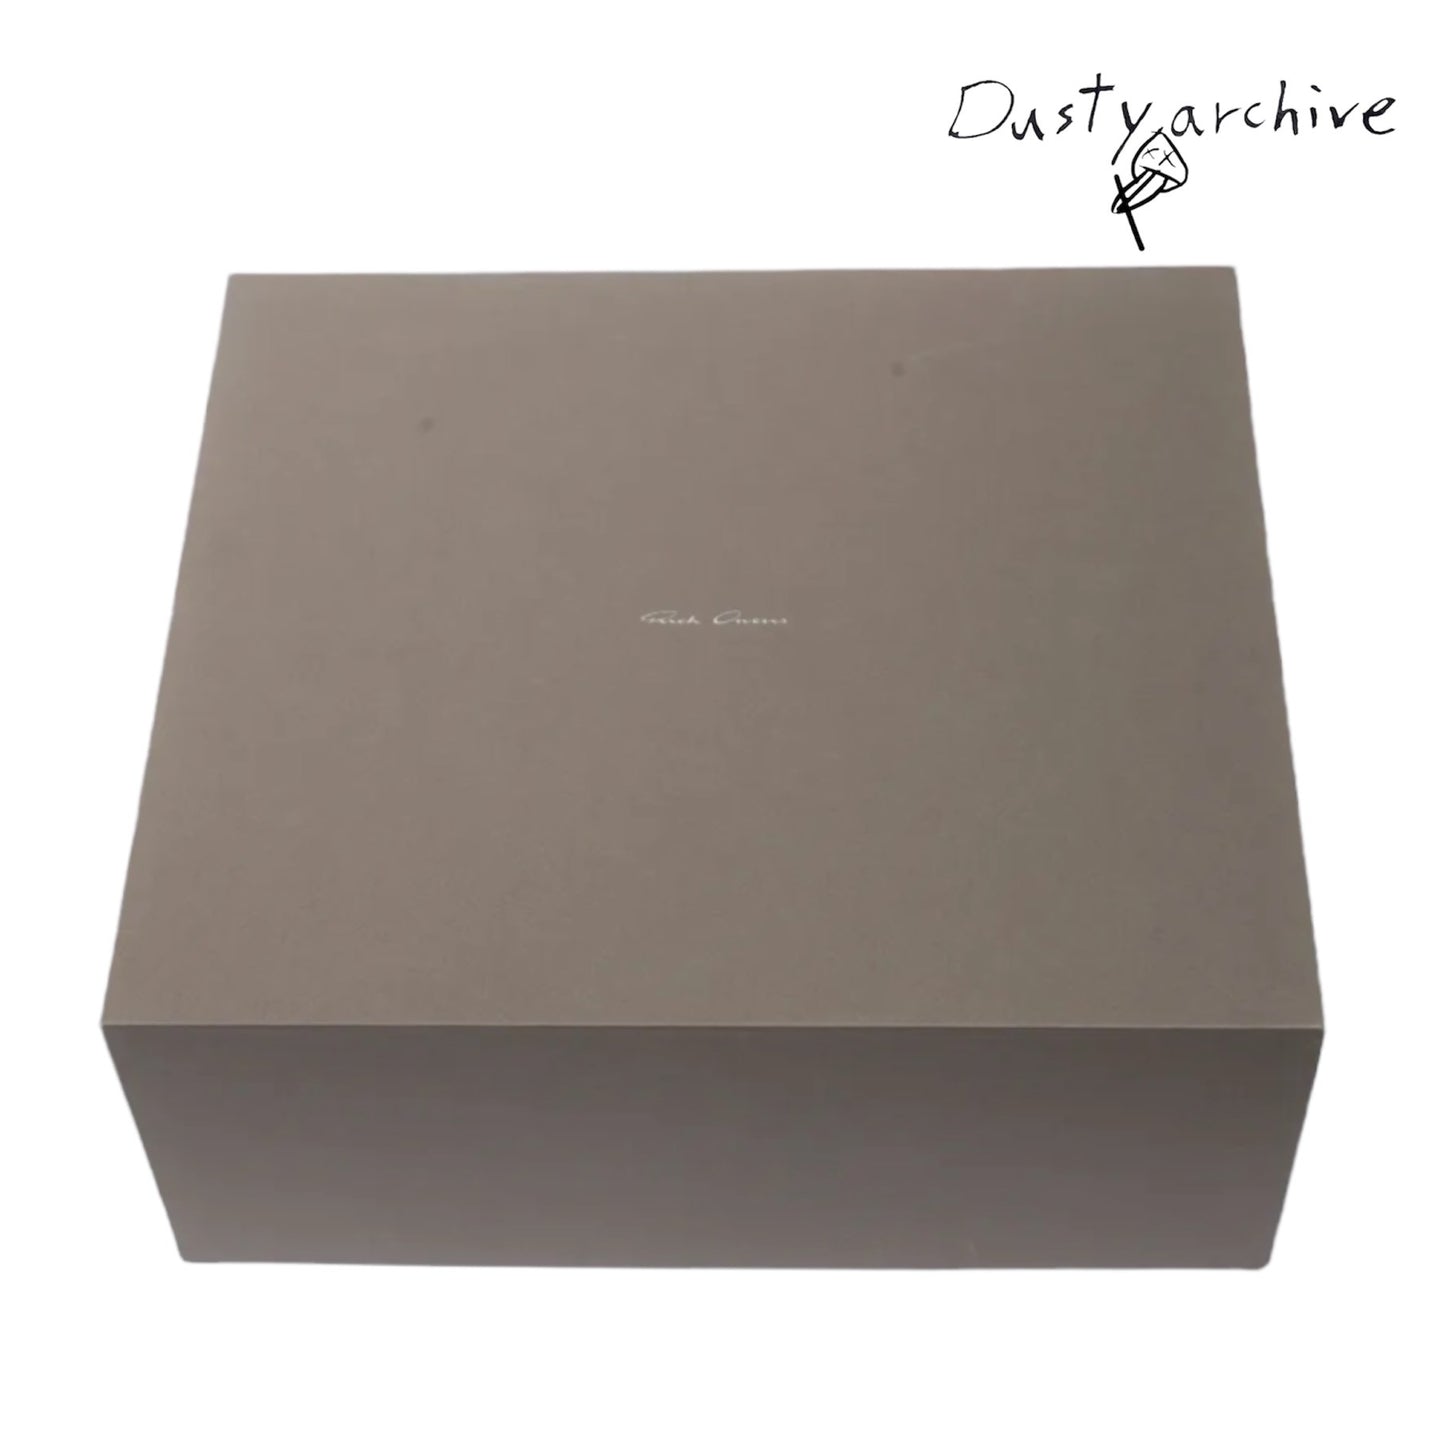 Add-on only! Rick owens shoe box